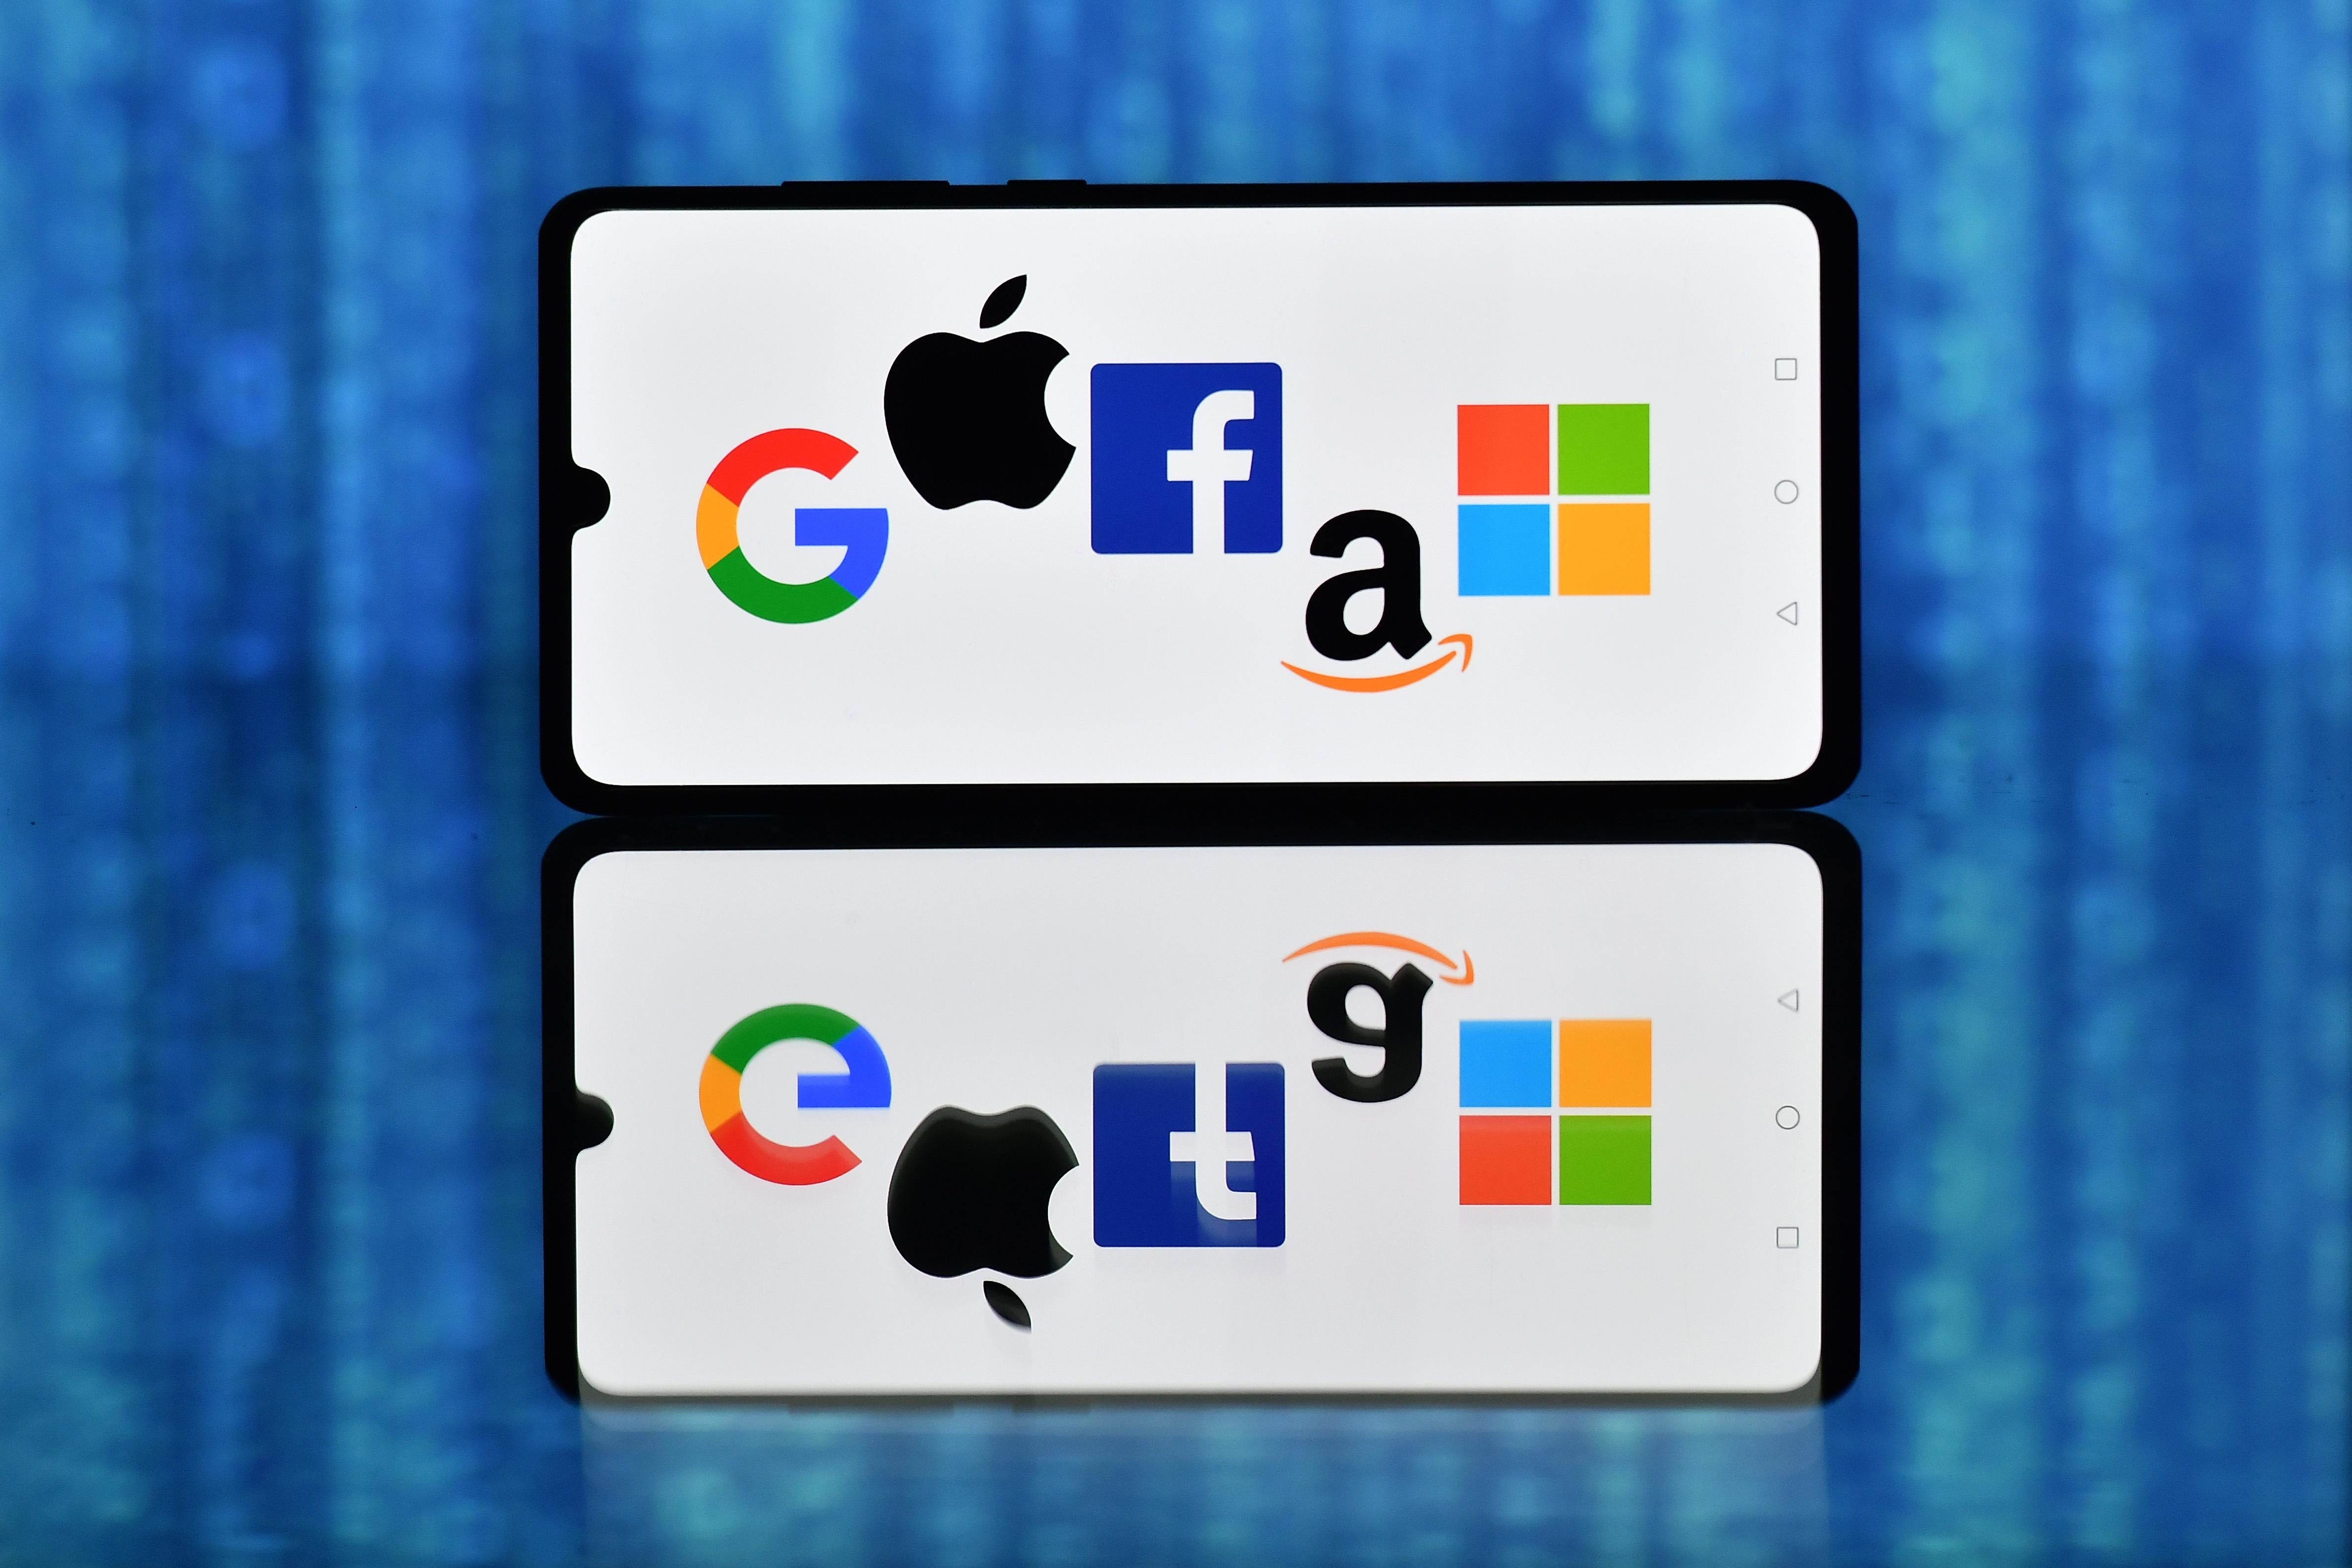 An illustration picture shows the logos of Google, Apple, Facebook, Amazon and Microsoft displayed on a mobile phone.